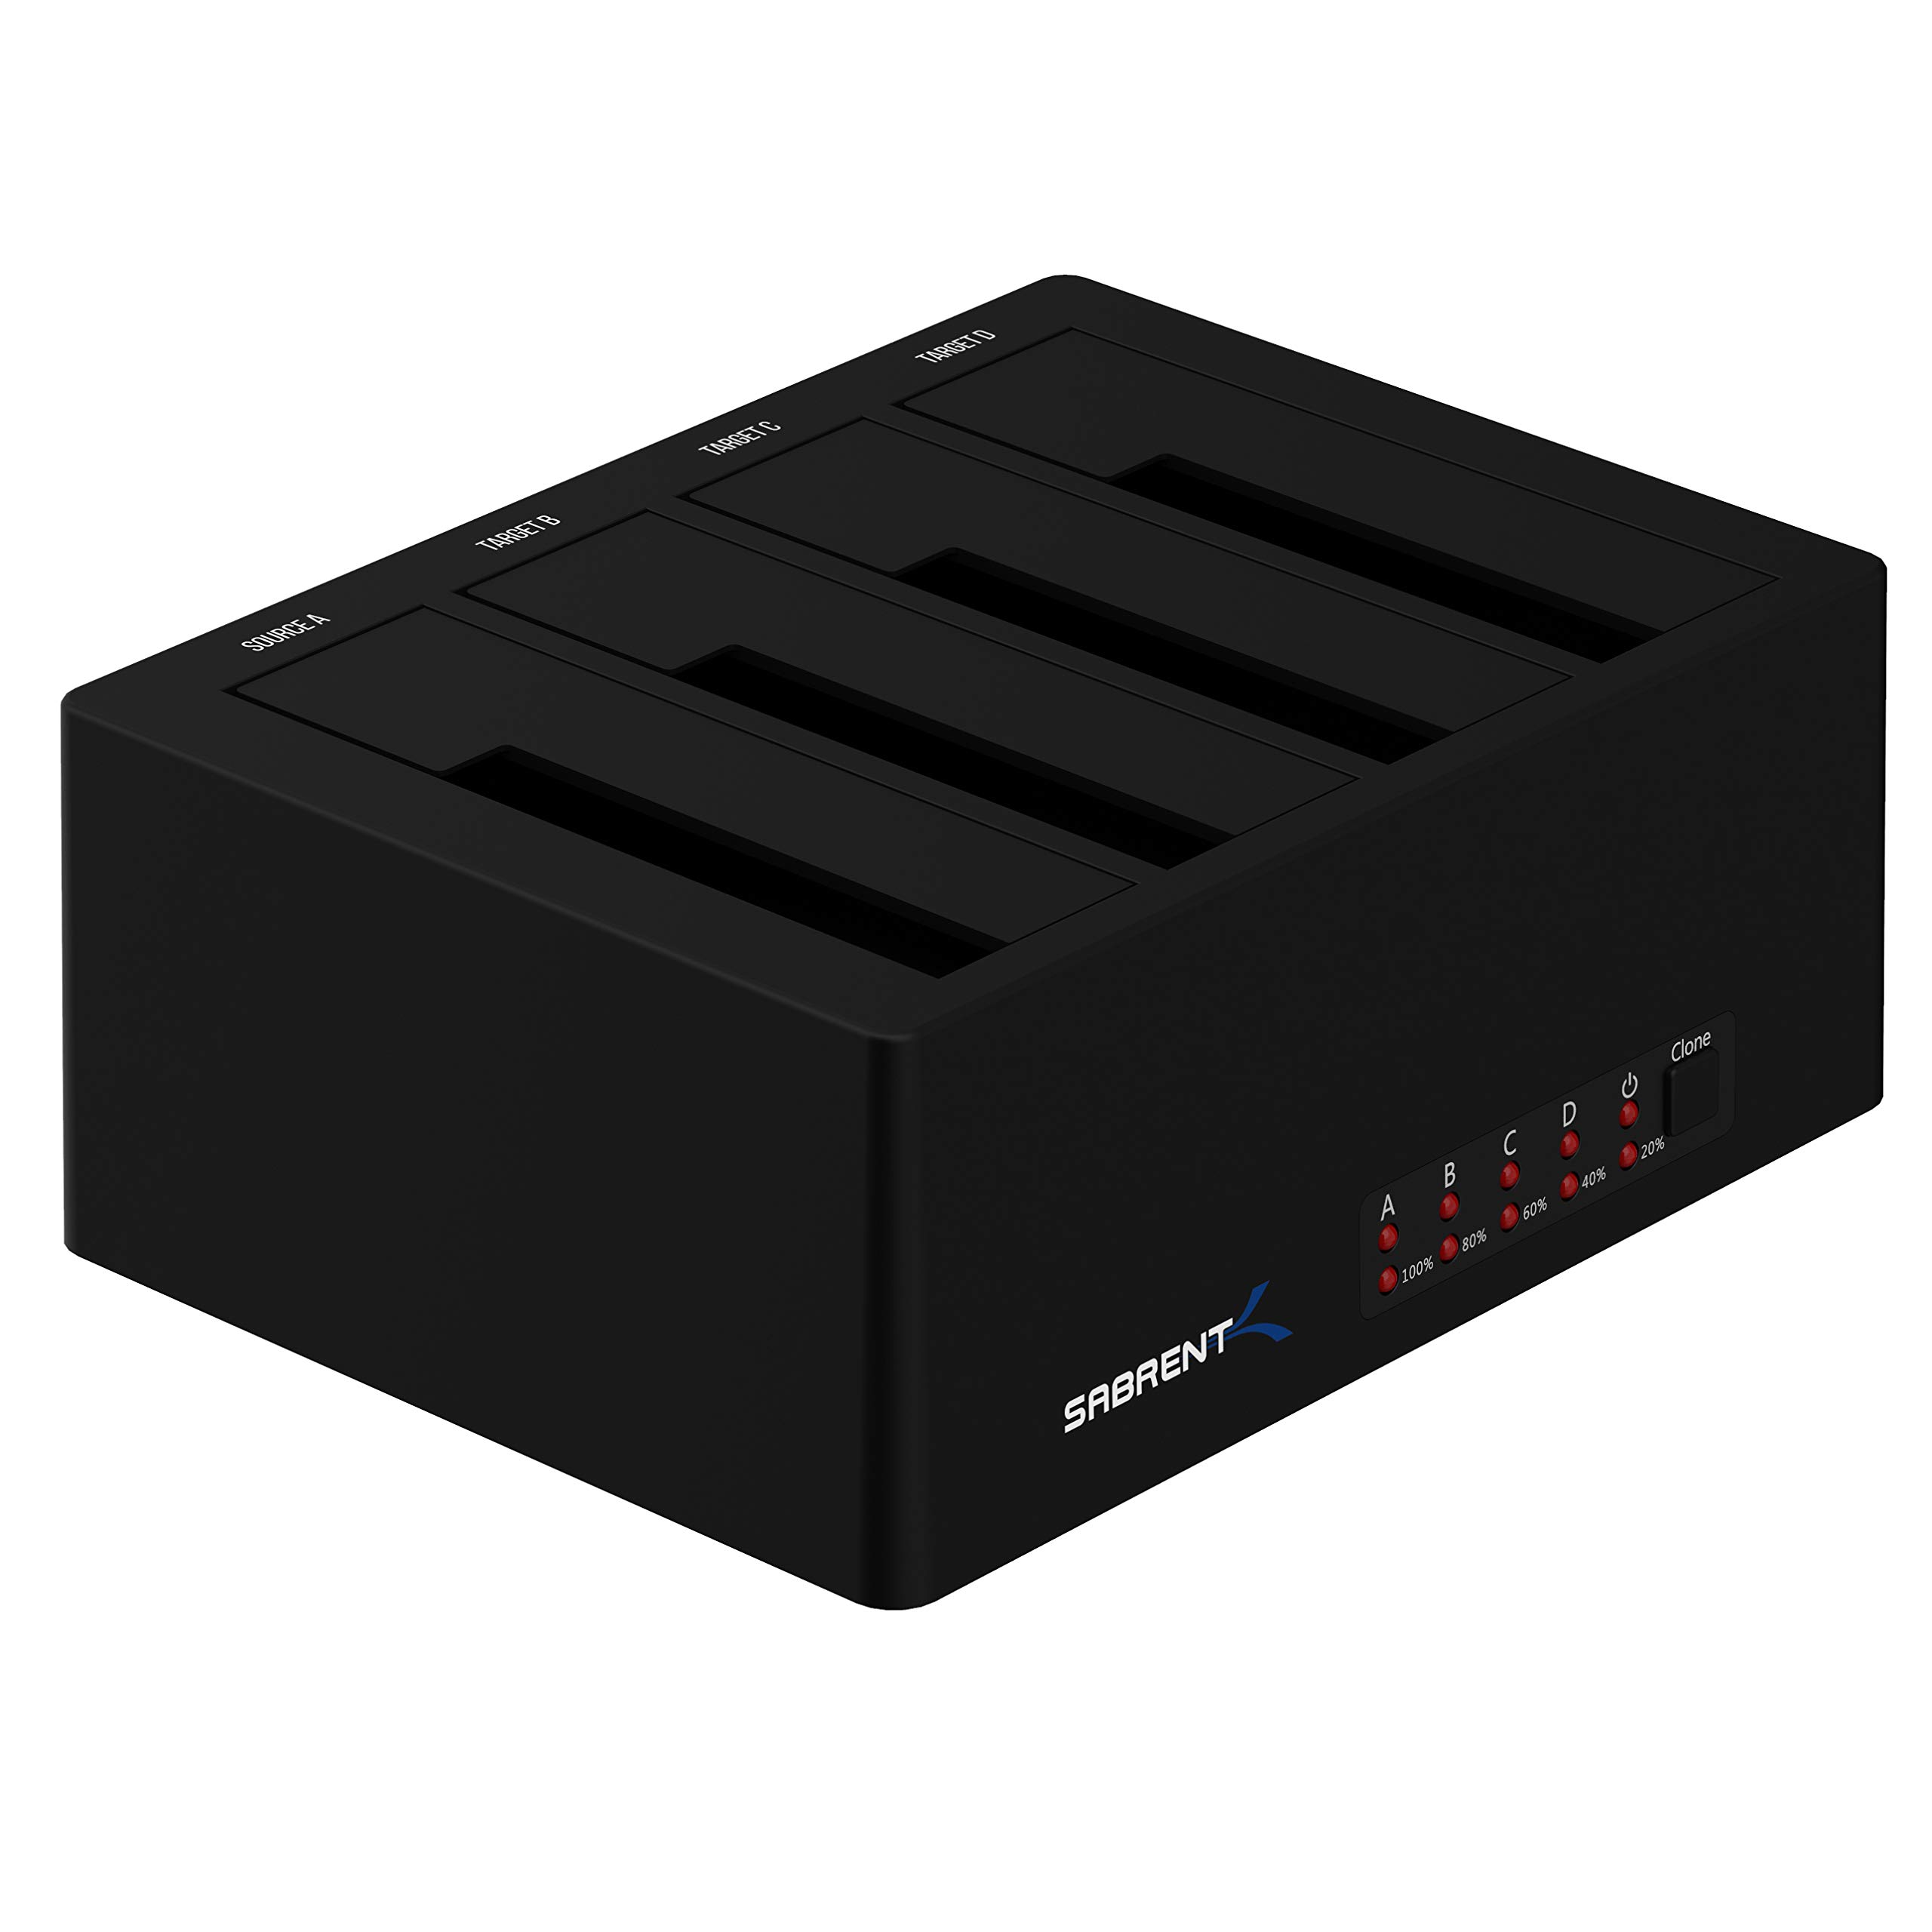 SABRENT Docking Station SSD/External Hard Disk/HDD 2.5/3.5 inch, USB 3.2 Gen 1, 4 Slots for SSD/HDD, with Power Supply and Fan, for SATA SSD/HDD, with 4 Separate ON/Off switches (DS-U3B4)